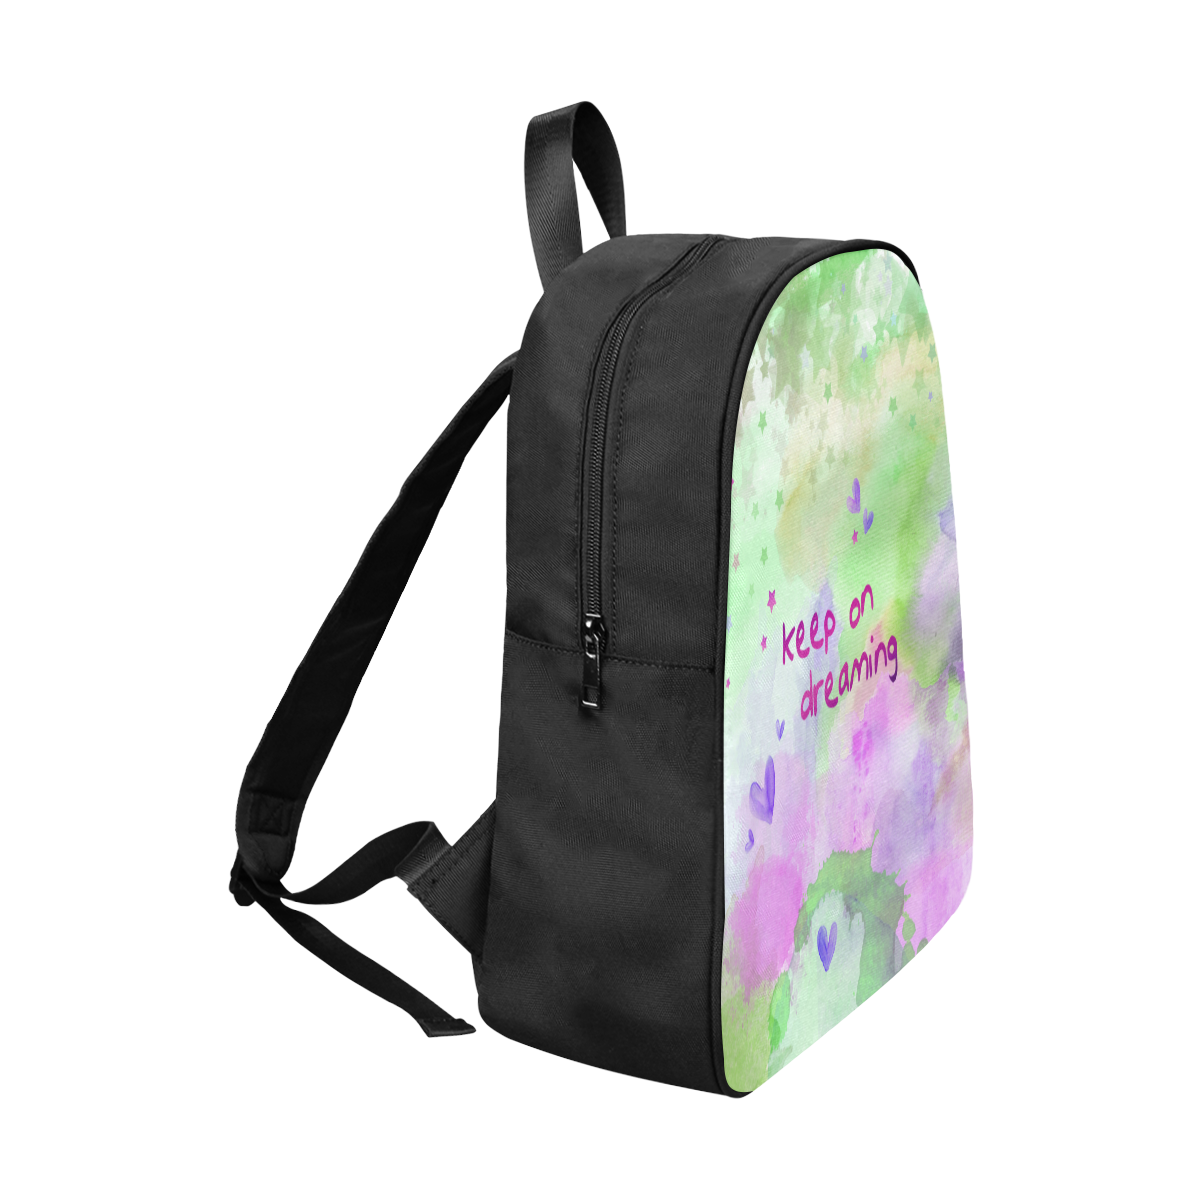 KEEP ON DREAMING - lilac and green Fabric School Backpack (Model 1682) (Large)